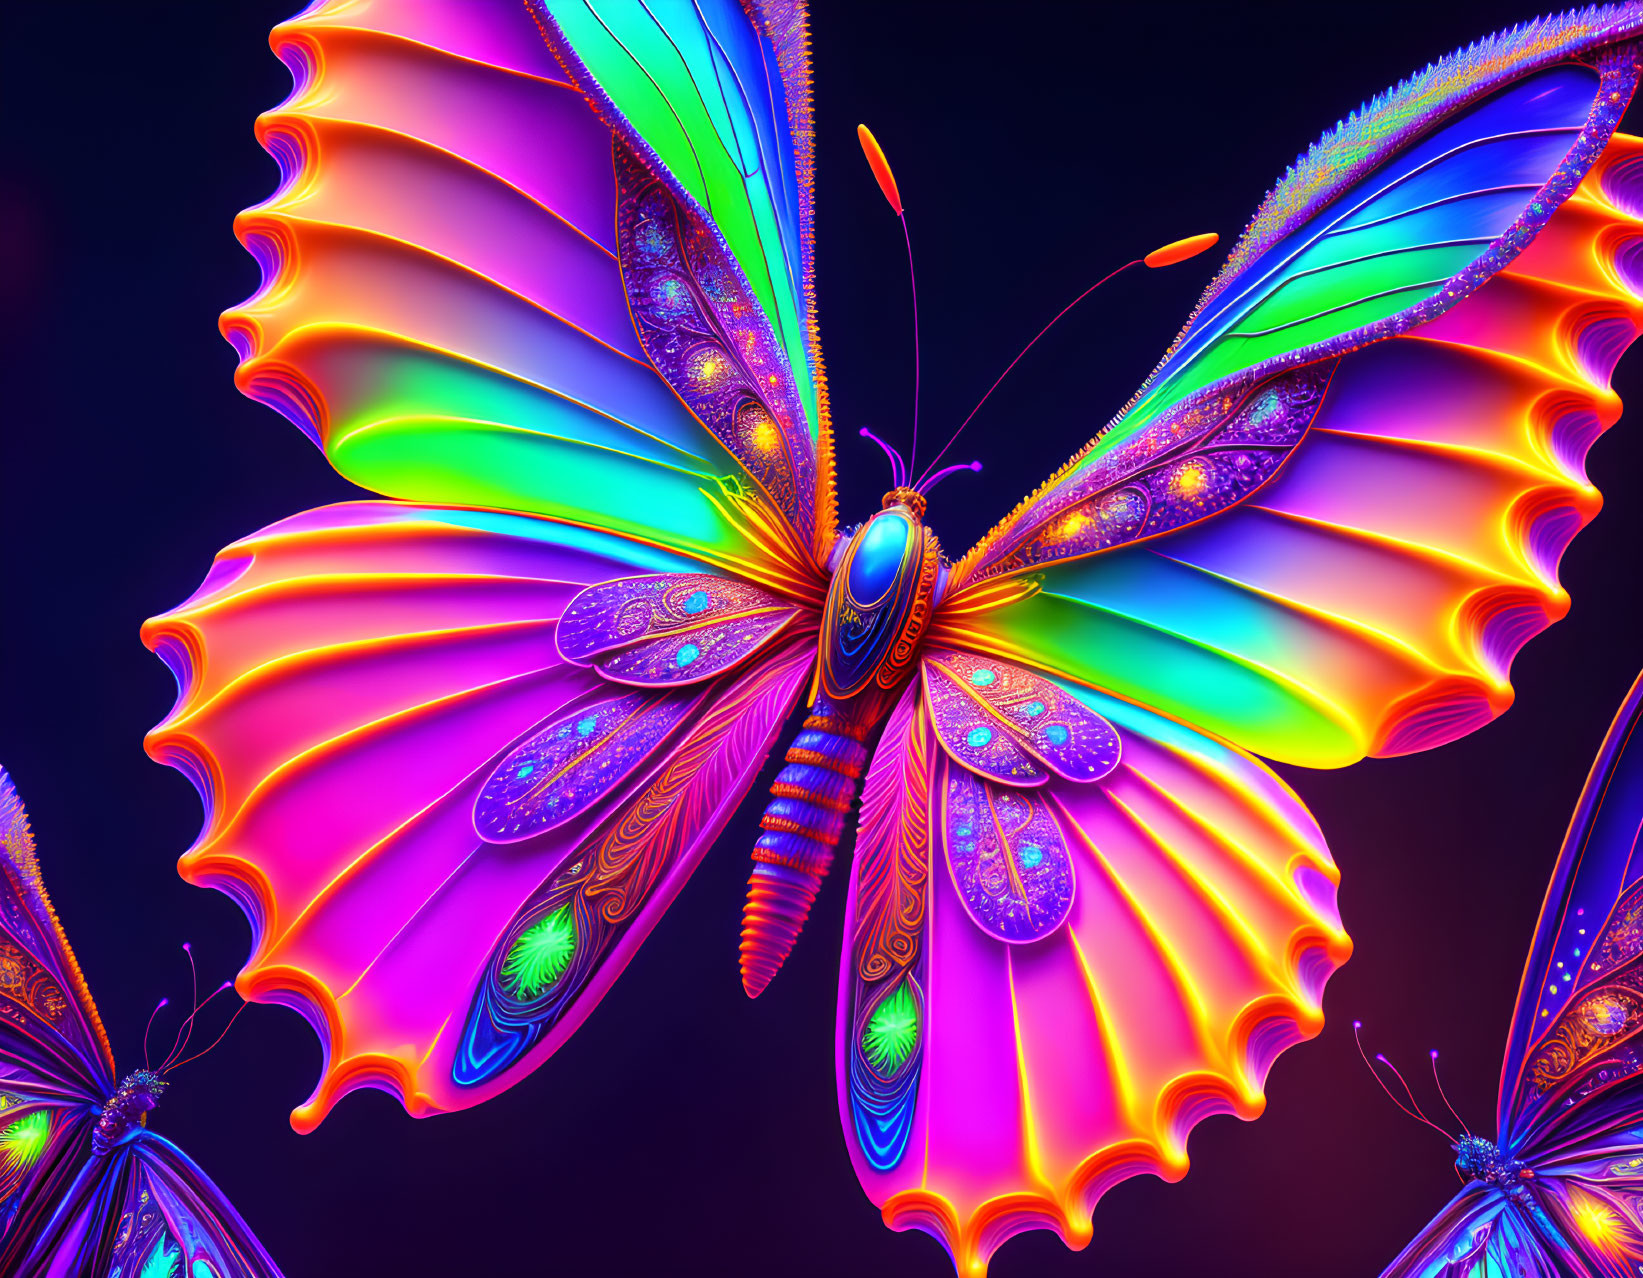 Neon-colored butterfly with intricate wing patterns on dark background